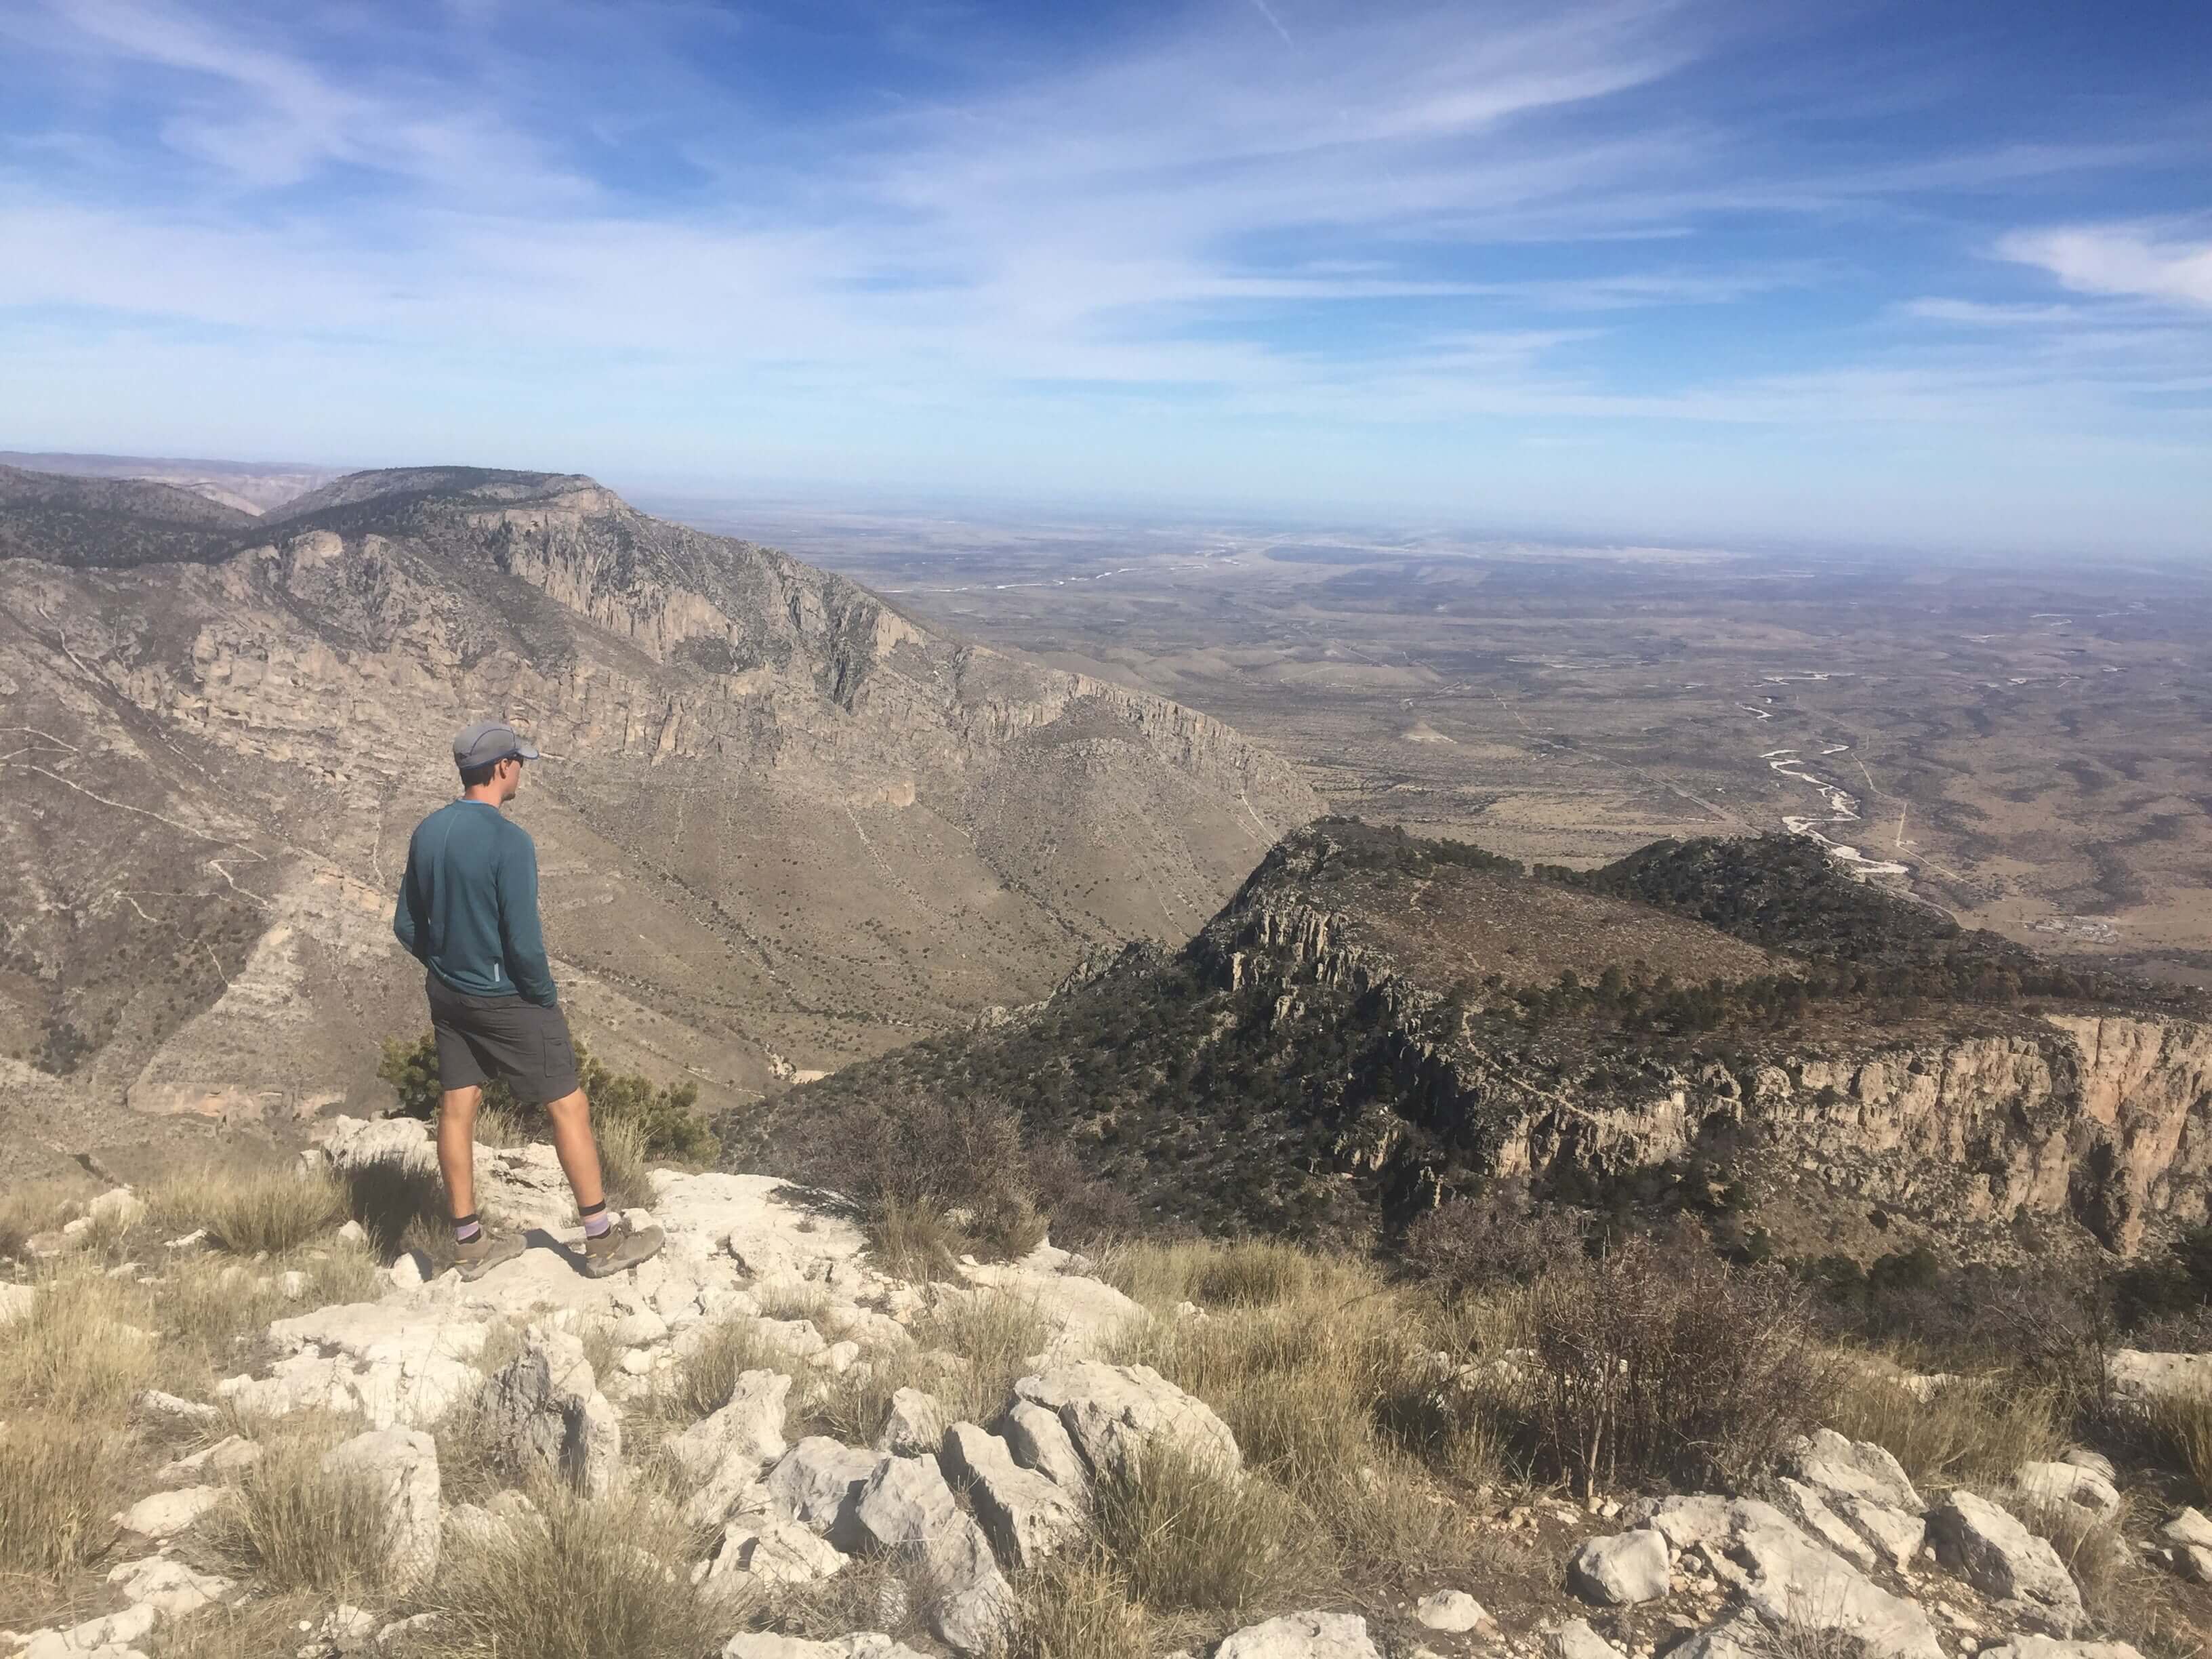 places to visit in texas: Guadalupe Mountains National Park